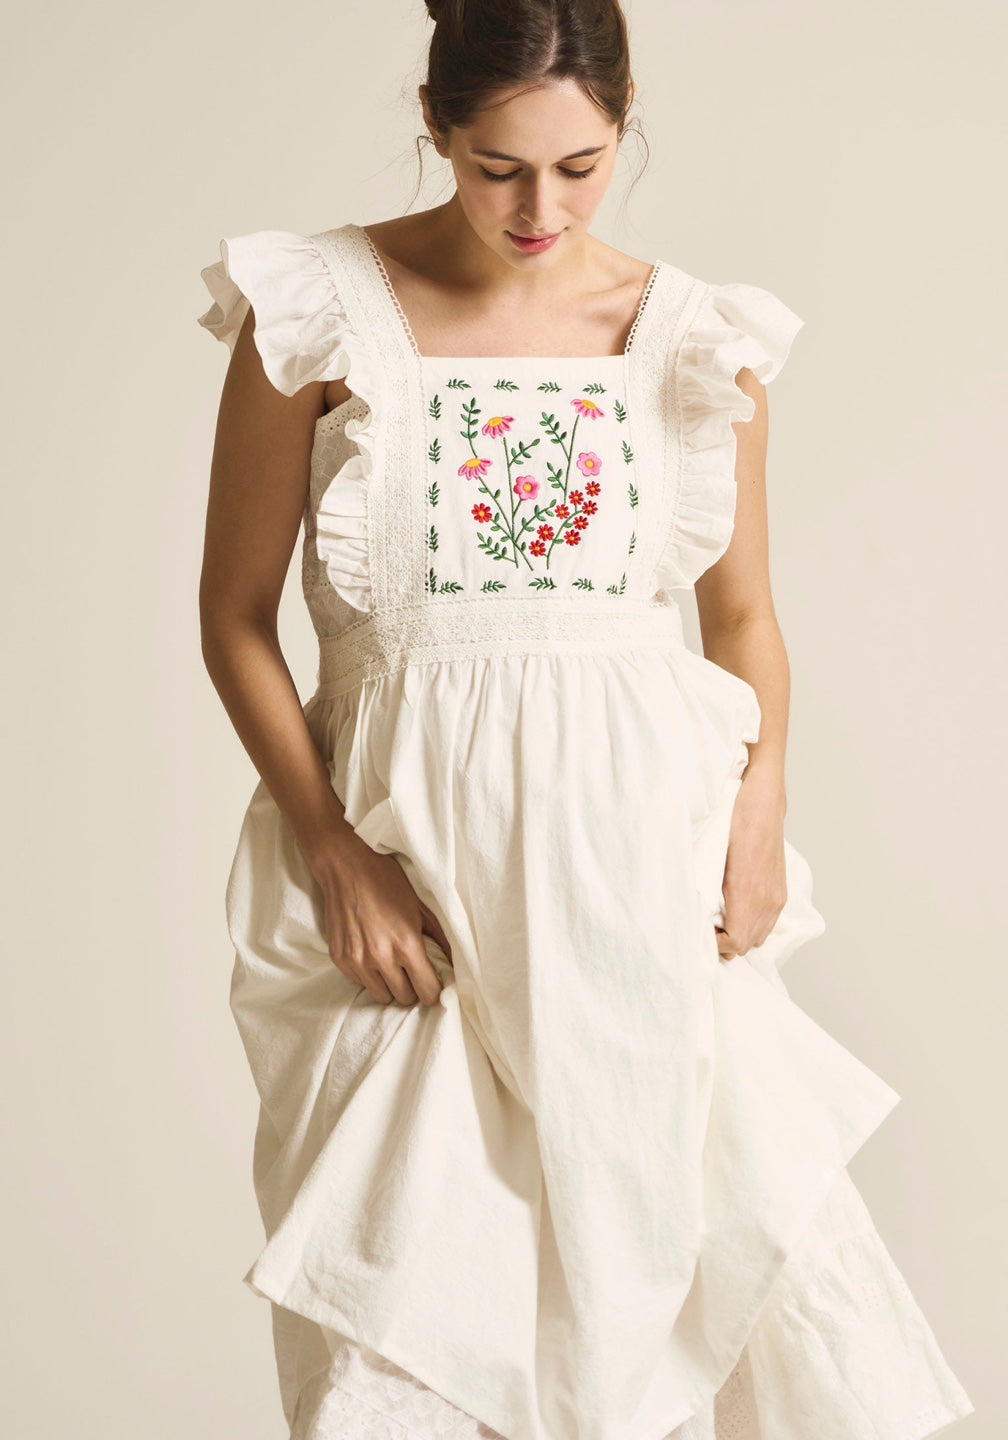 EMBROIDERED APRON DRESS